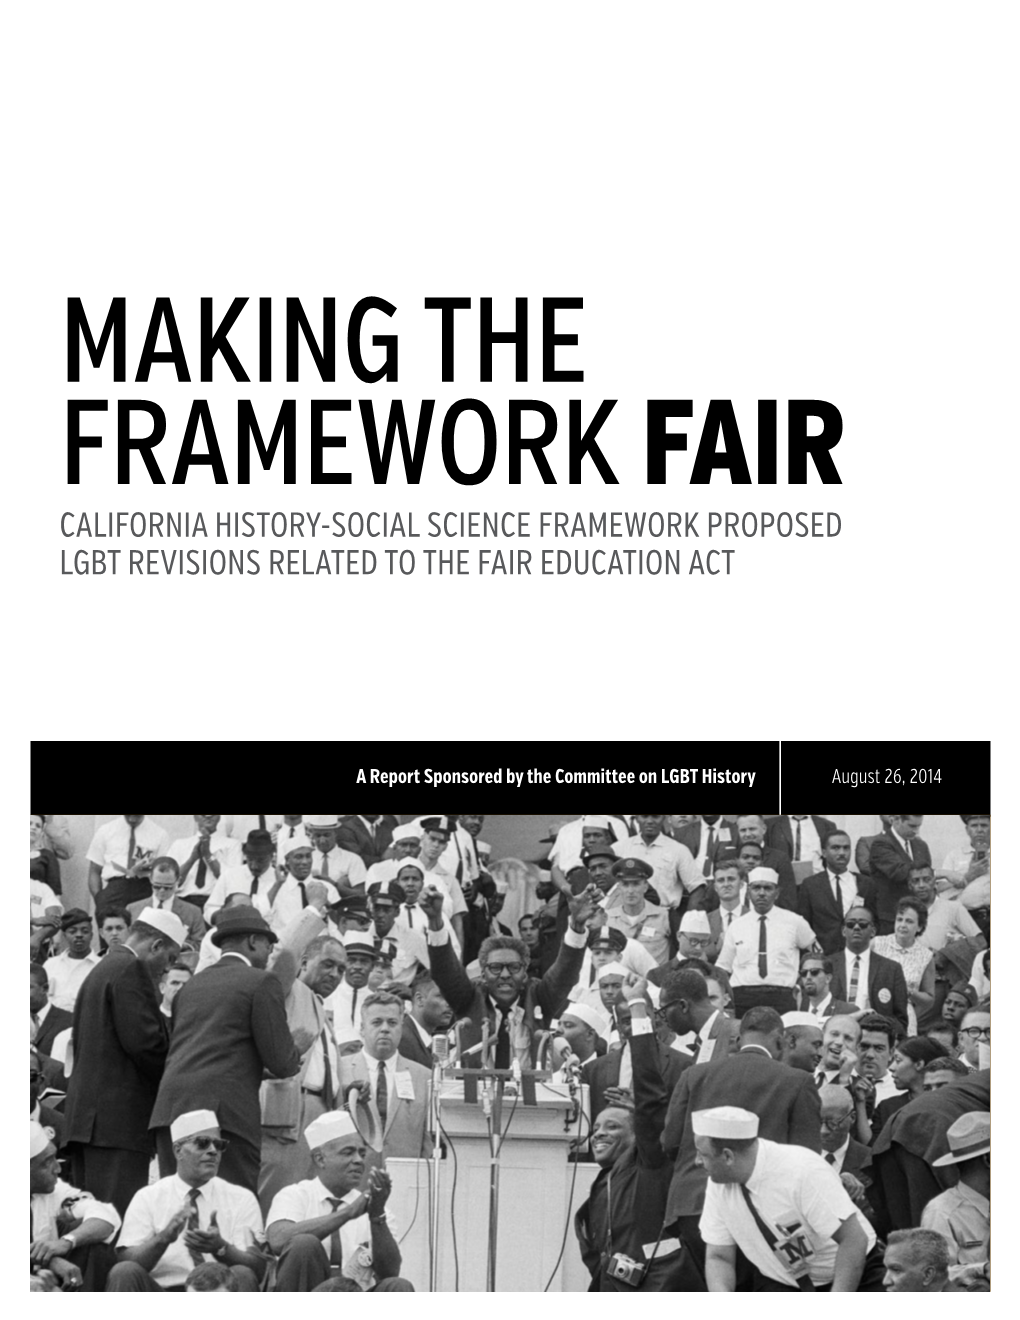 Making the Framework Fair California History-Social Science Framework Proposed Lgbt Revisions Related to the Fair Education Act